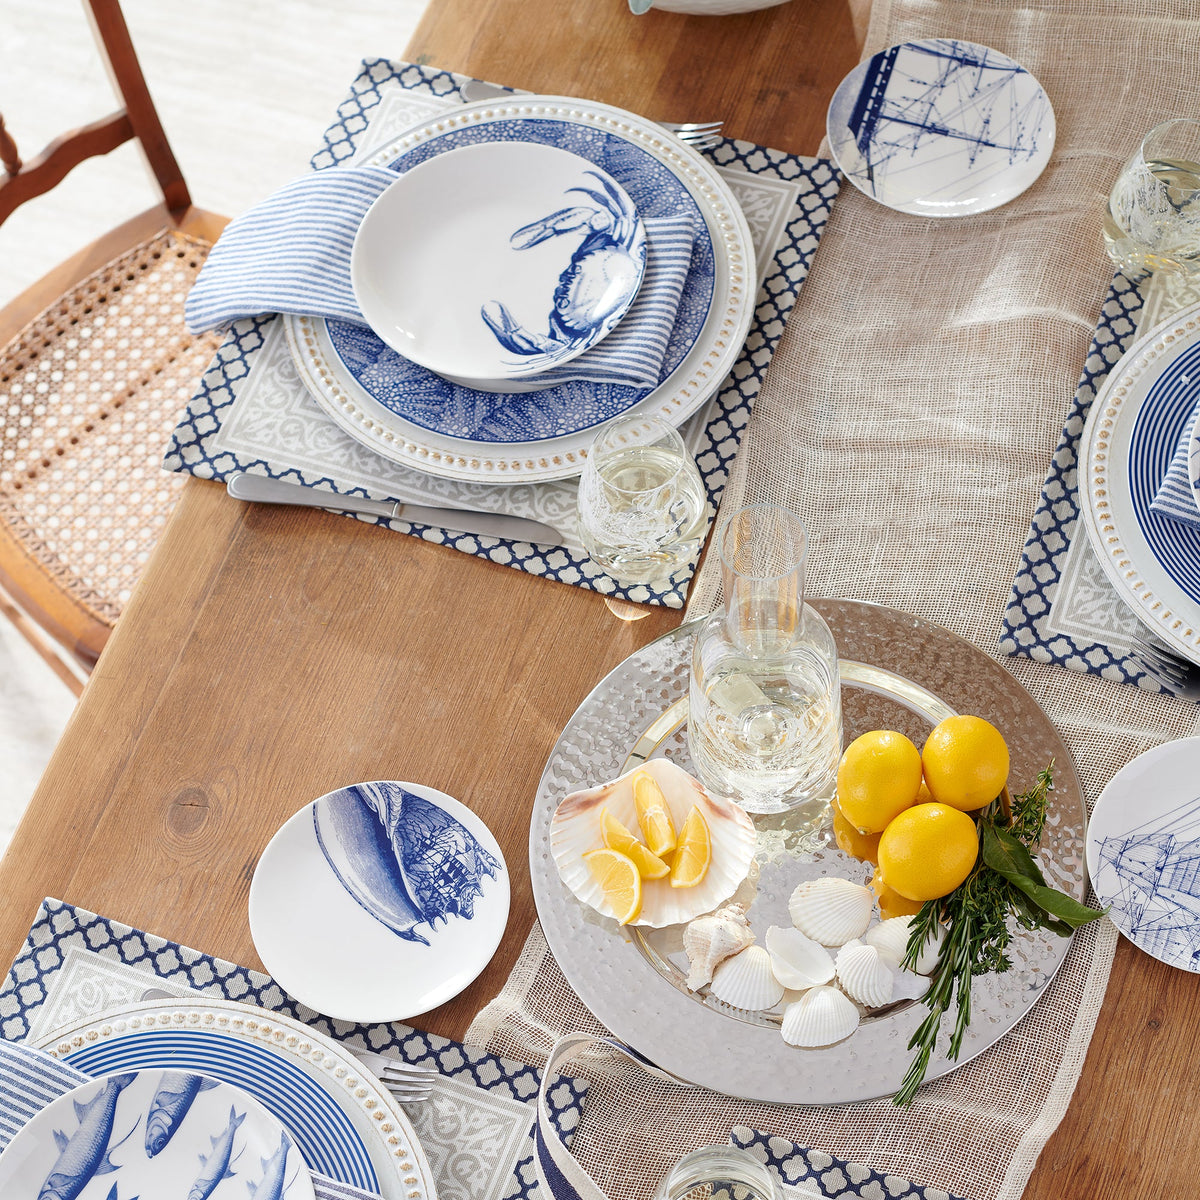 A wooden dining table set with heirloom-quality dinnerware, folded napkins, glassware, a silver platter with lemons, herbs, and Shells Small Plates from Caskata Artisanal Home&#39;s beach collection, and a mesh table runner.